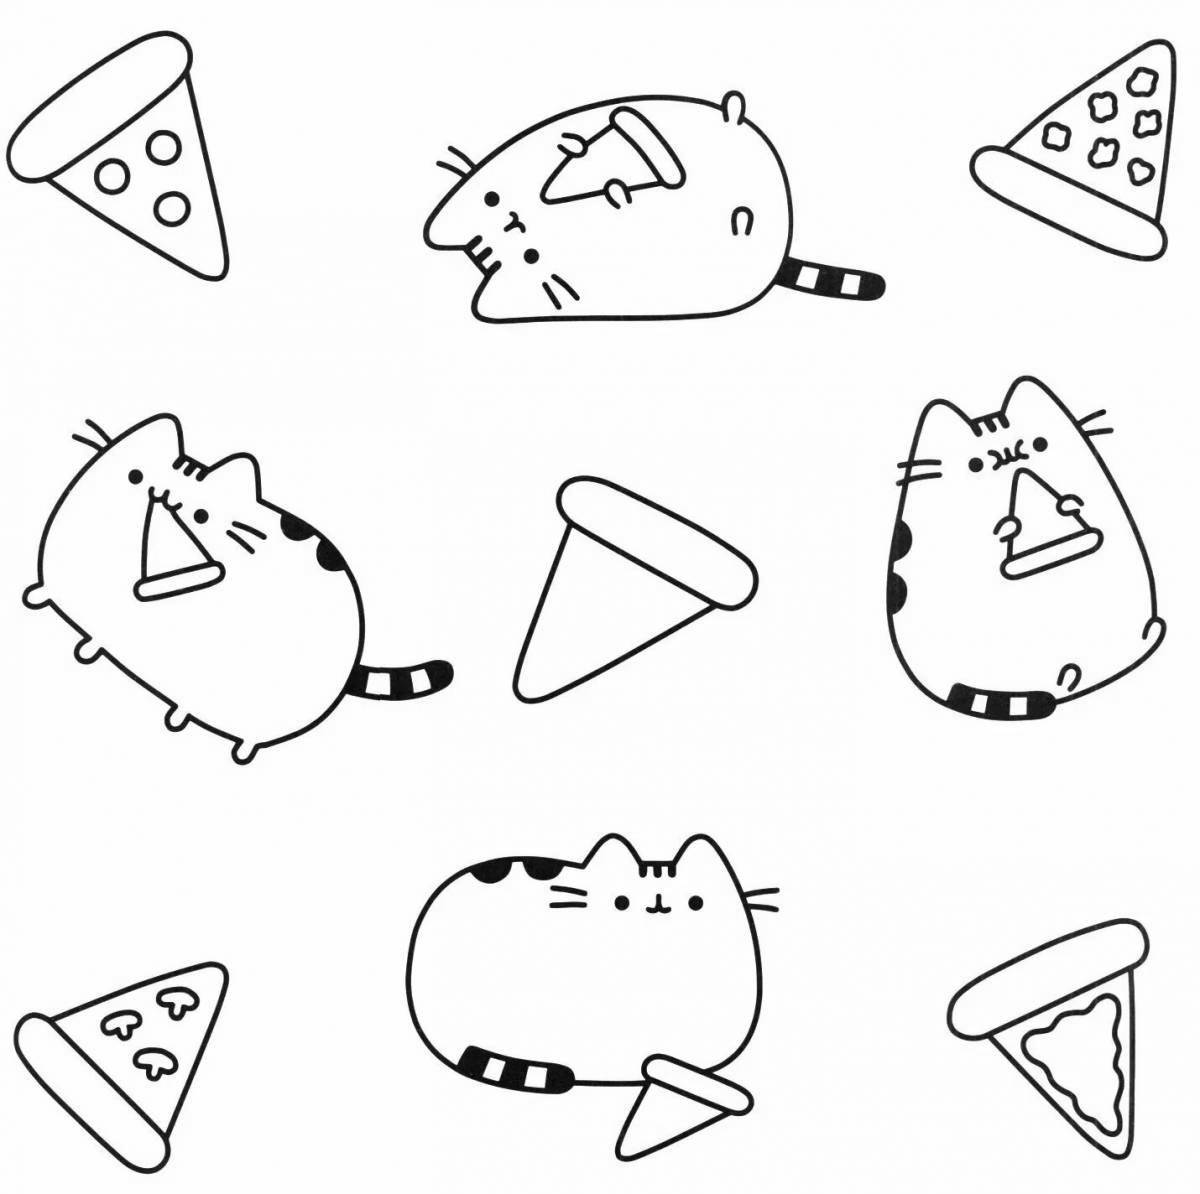 Cats small for stickers #11